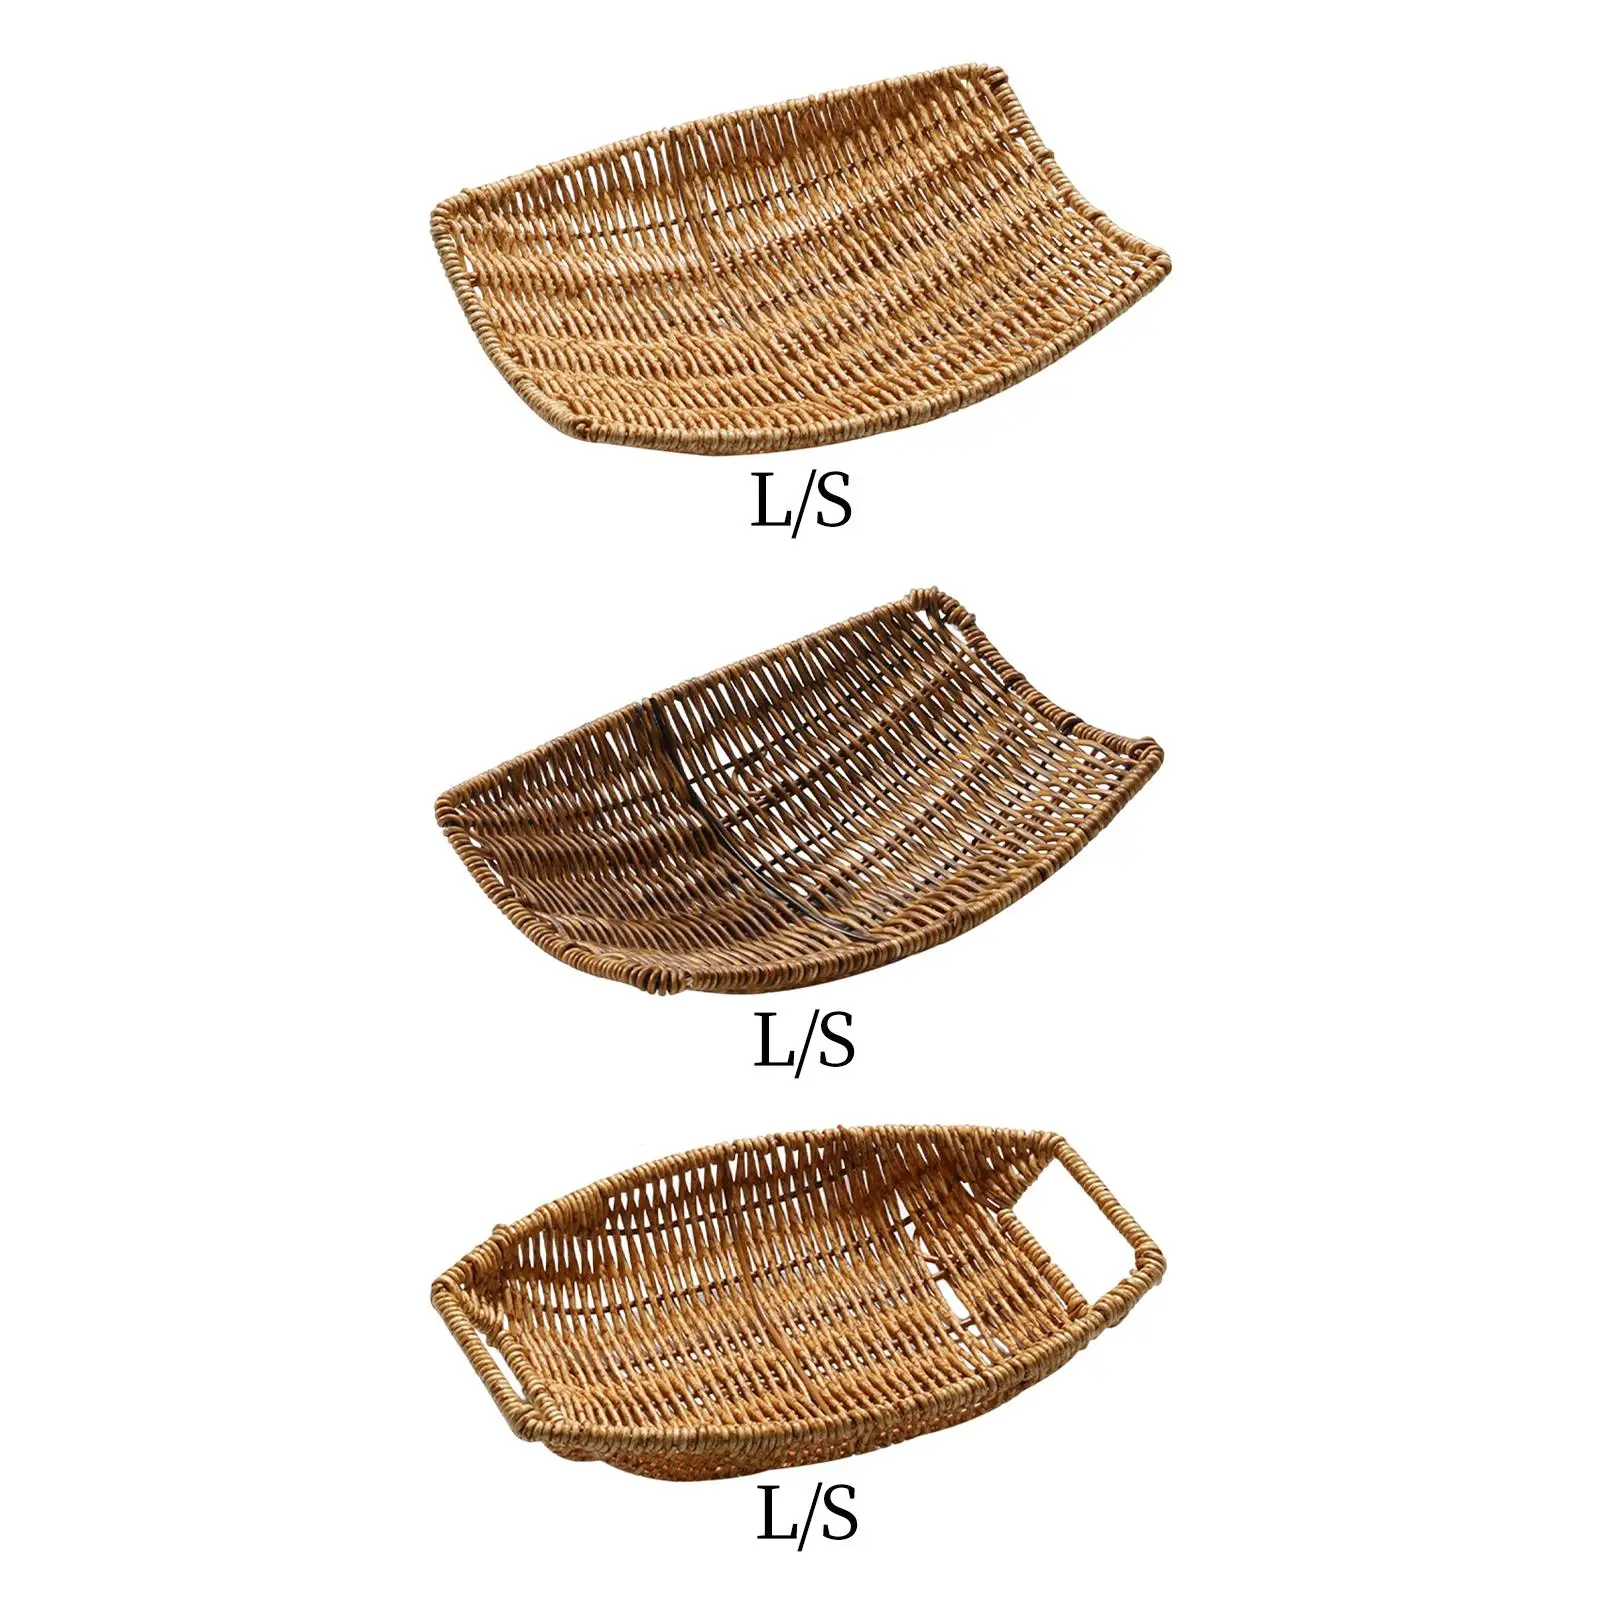 

Hand Woven Oval Rattan Serving Tray Candy snacks plate Decorative Wicker Storage Basket for Candy Drinks snack Table